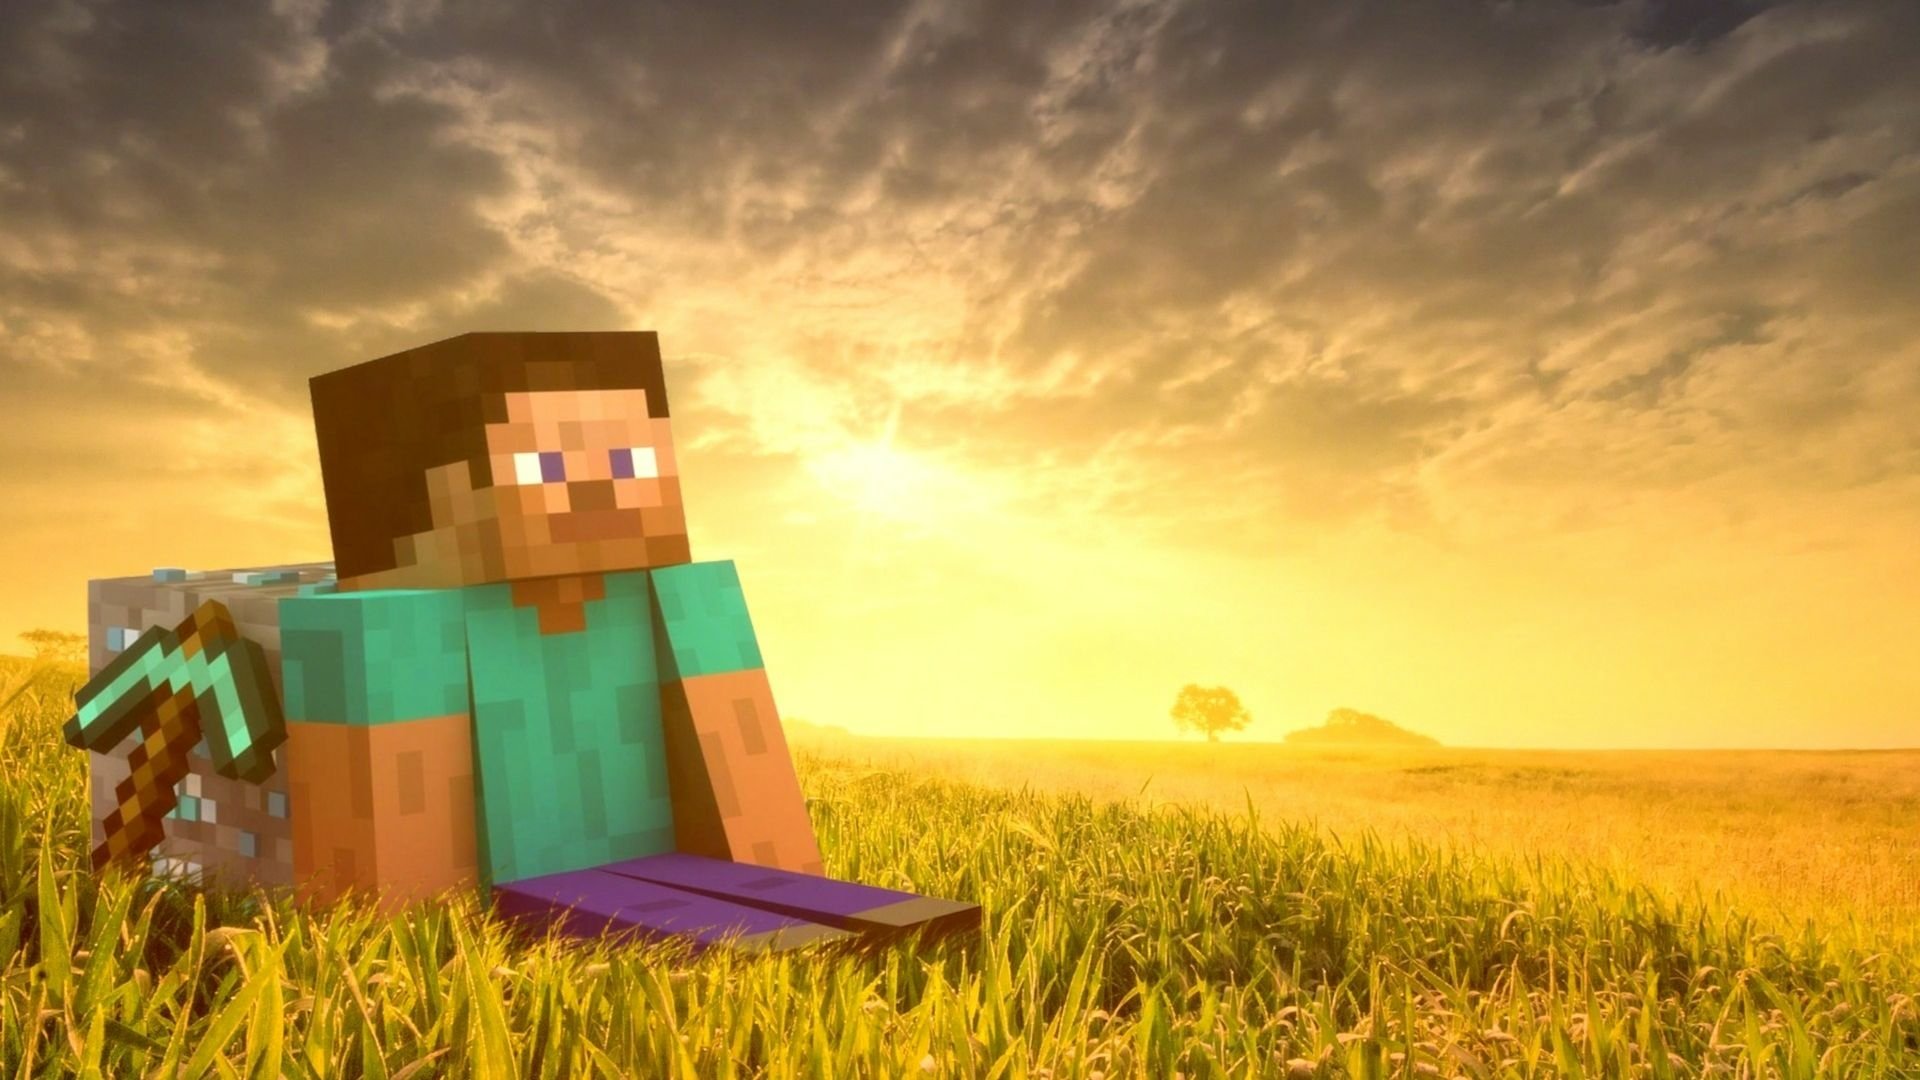 Minecraft Hd Steve With Sword At Sunset